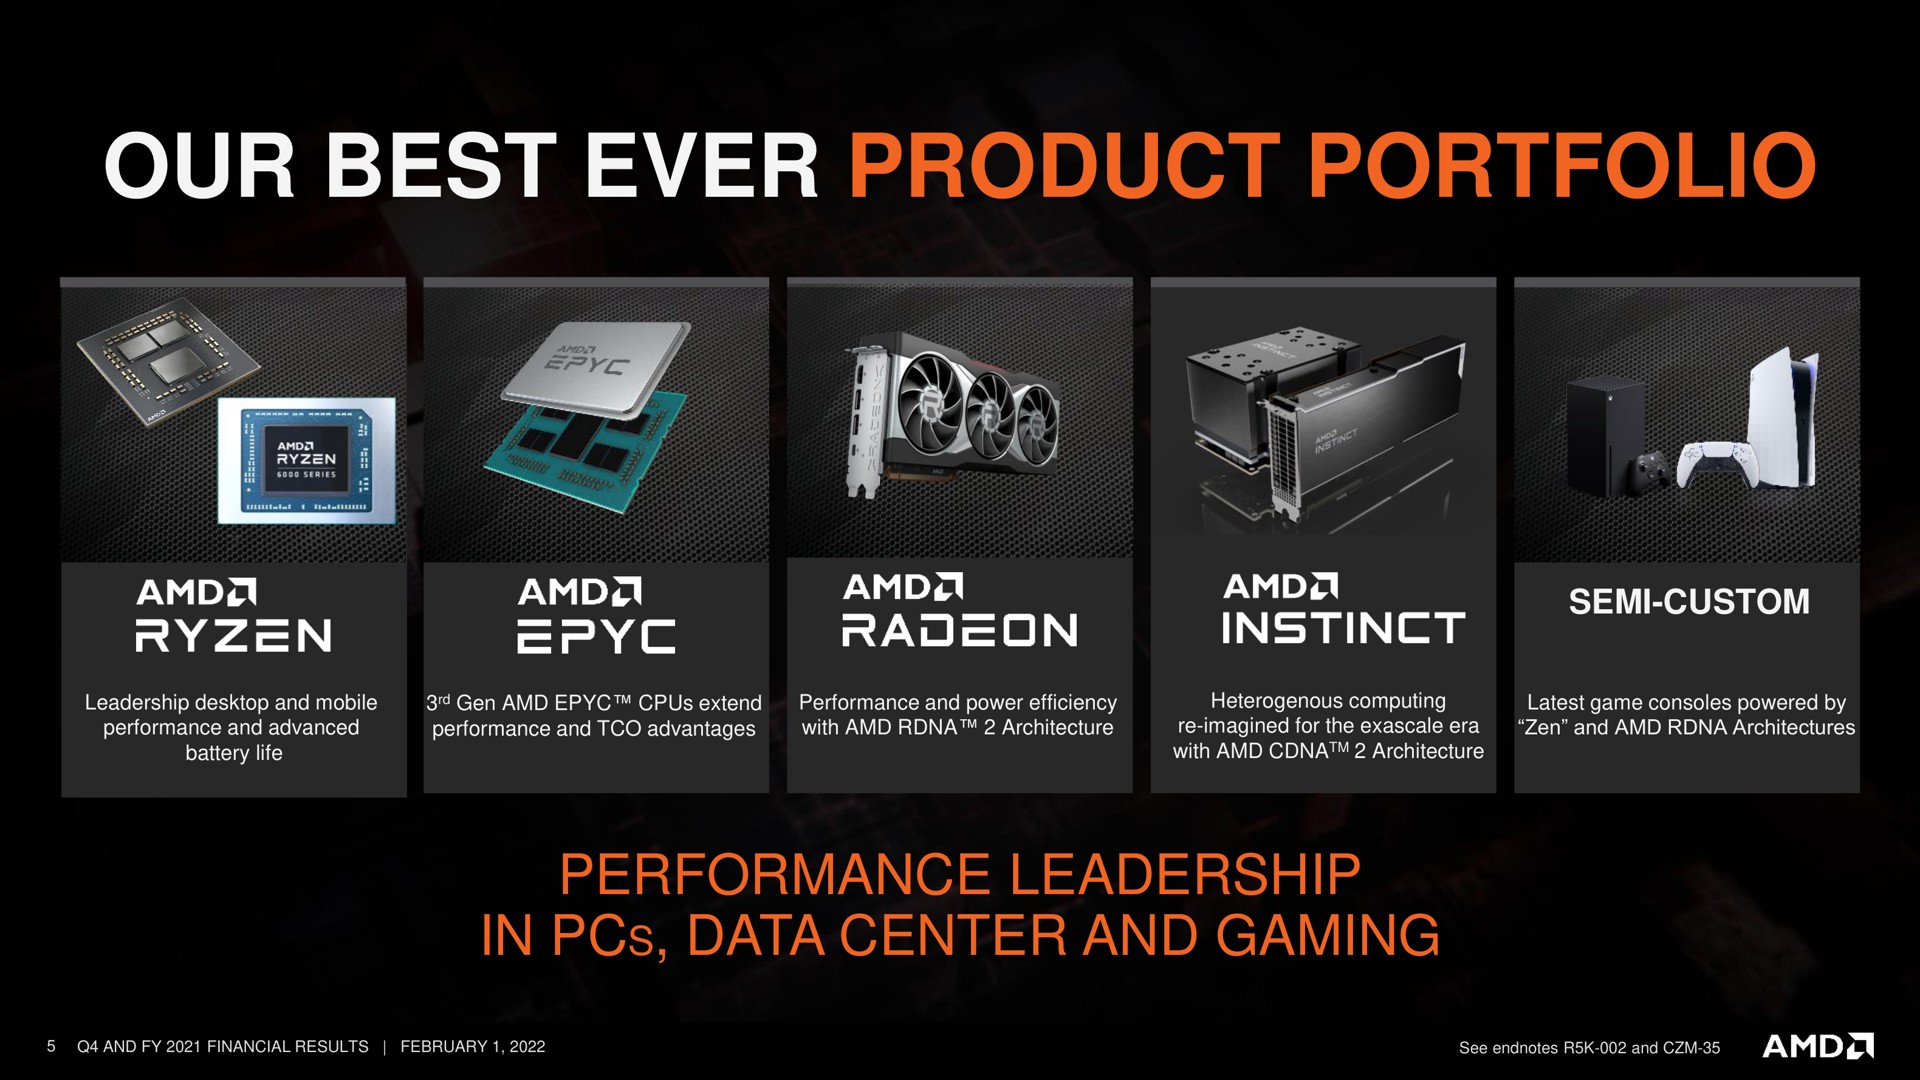 our best ever product portfolio eye canal spa semi custom performance leadership in data center and gaming | AMD